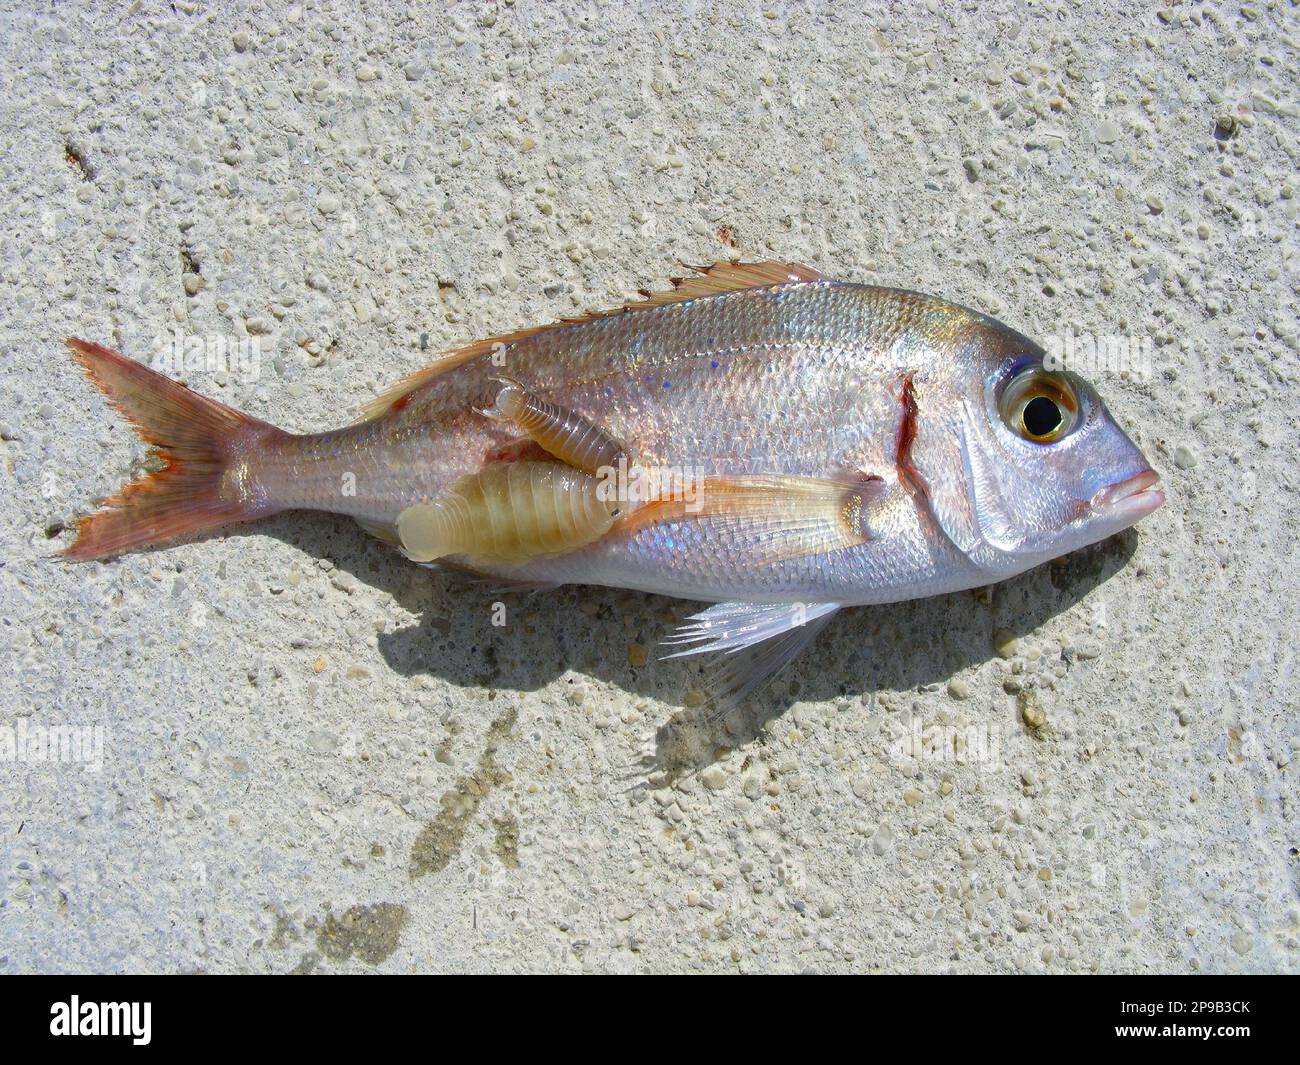 The common pandora (Pagellus erythrinus) a fish of the sea bream family, Sparidae with parasites Anilocra physodes attached to the side of the body. Stock Photo